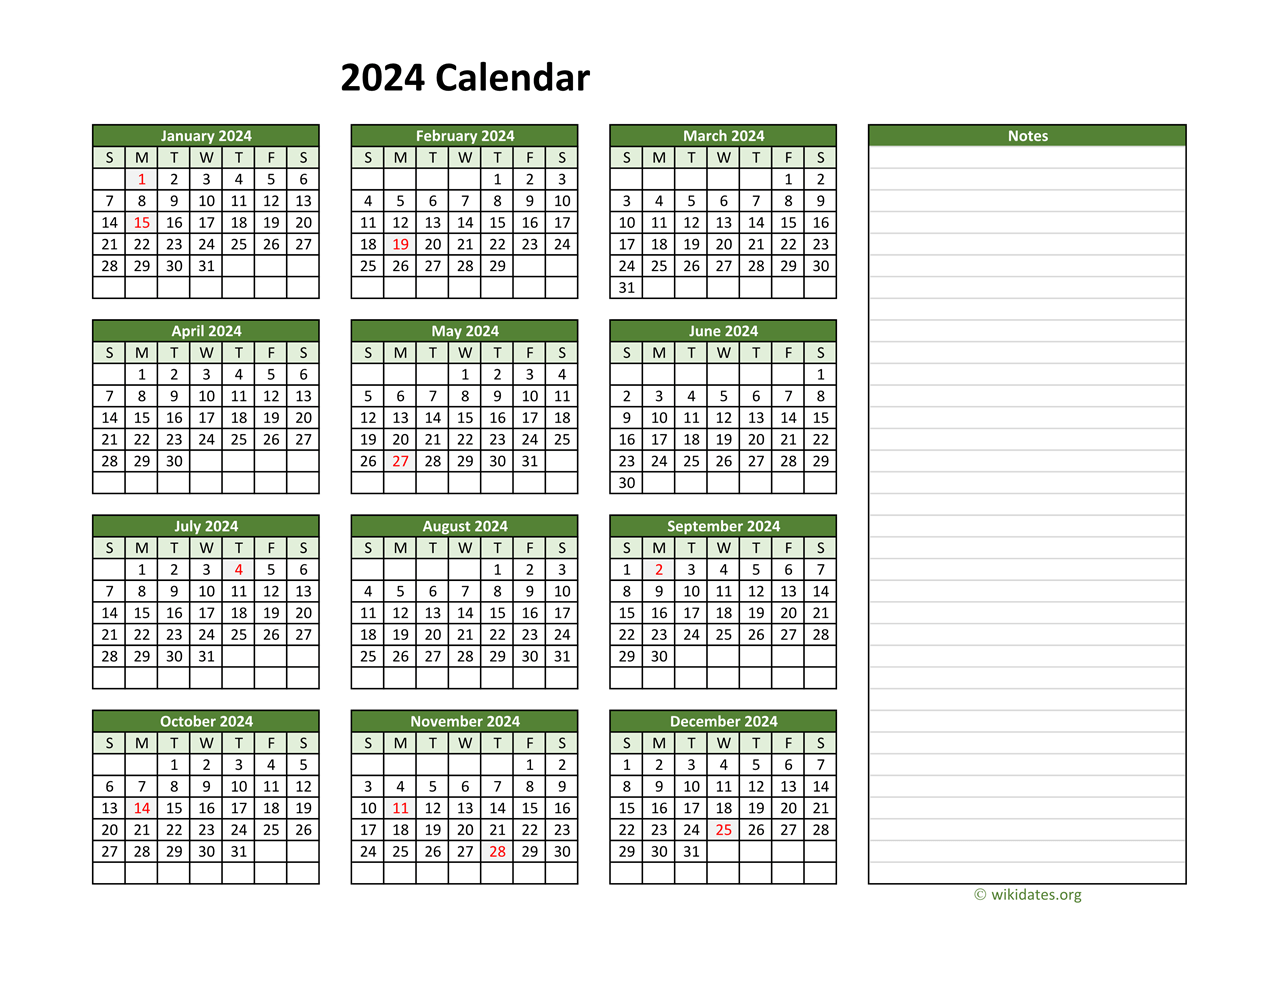 Yearly Printable 2024 Calendar With Notes | Wikidates for 2024 Printable Calendar With Notes